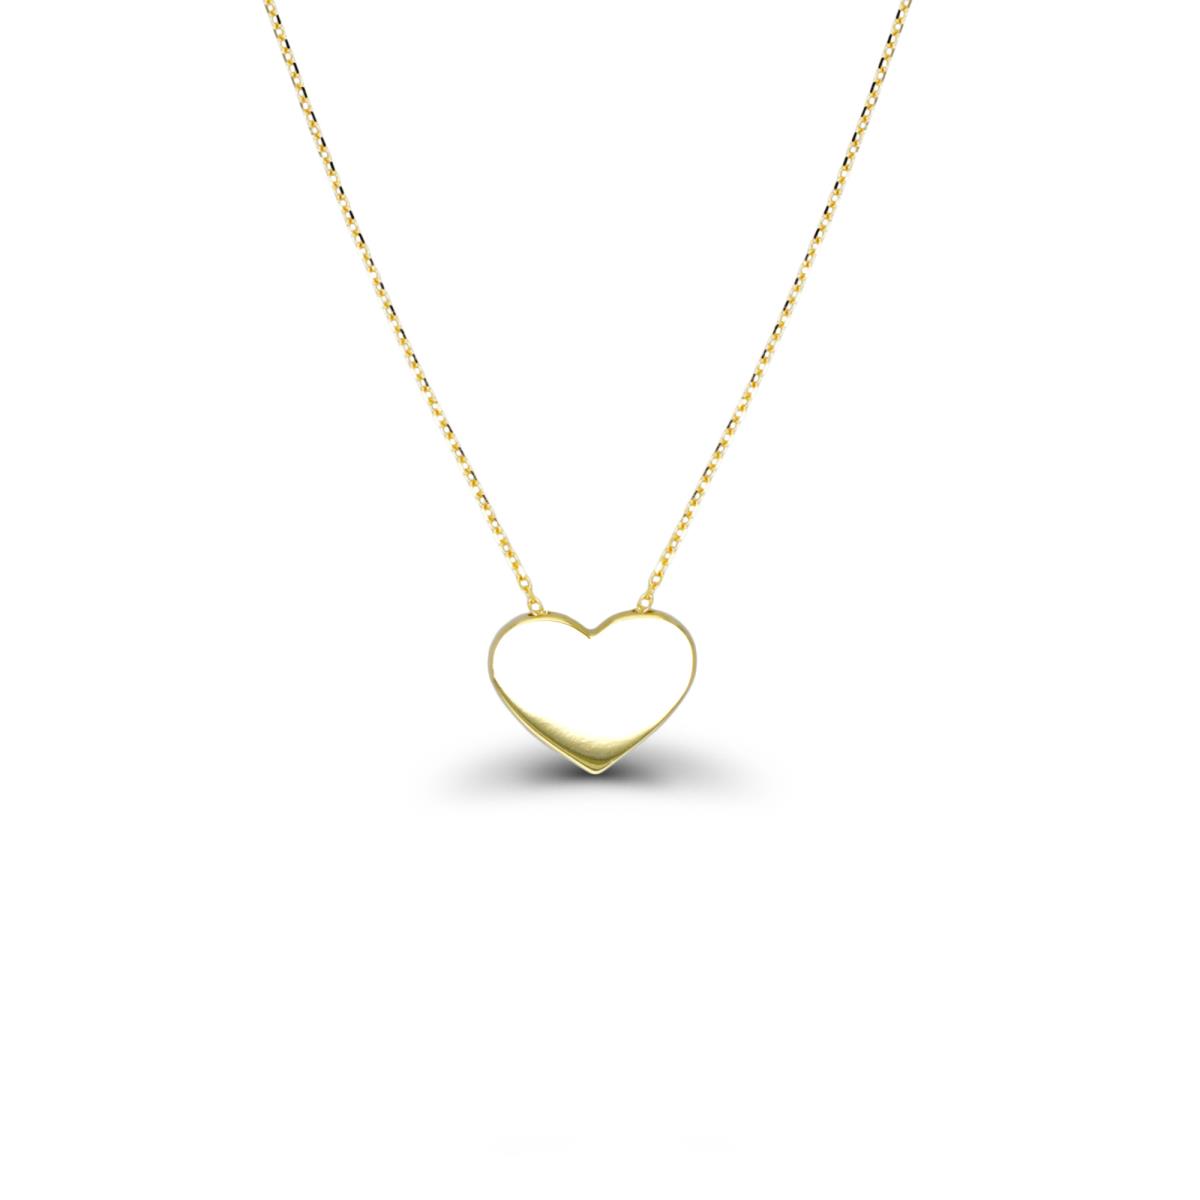 10K Yellow Gold Polished Heart 16"+2" Necklace